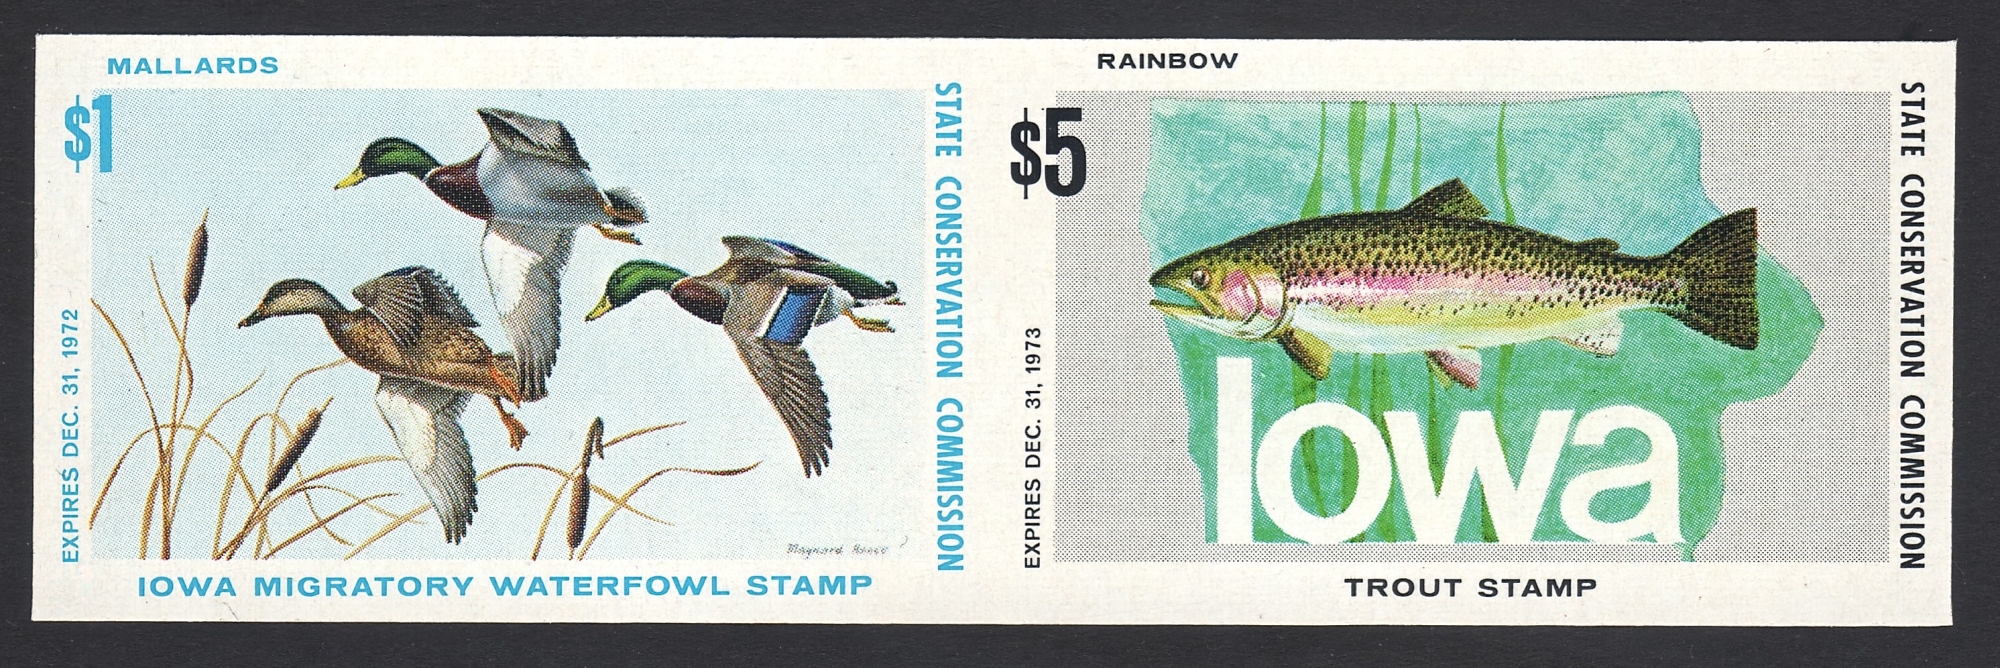 1973 Iowa Duck/Trout Printers Waste Imperforate Pair